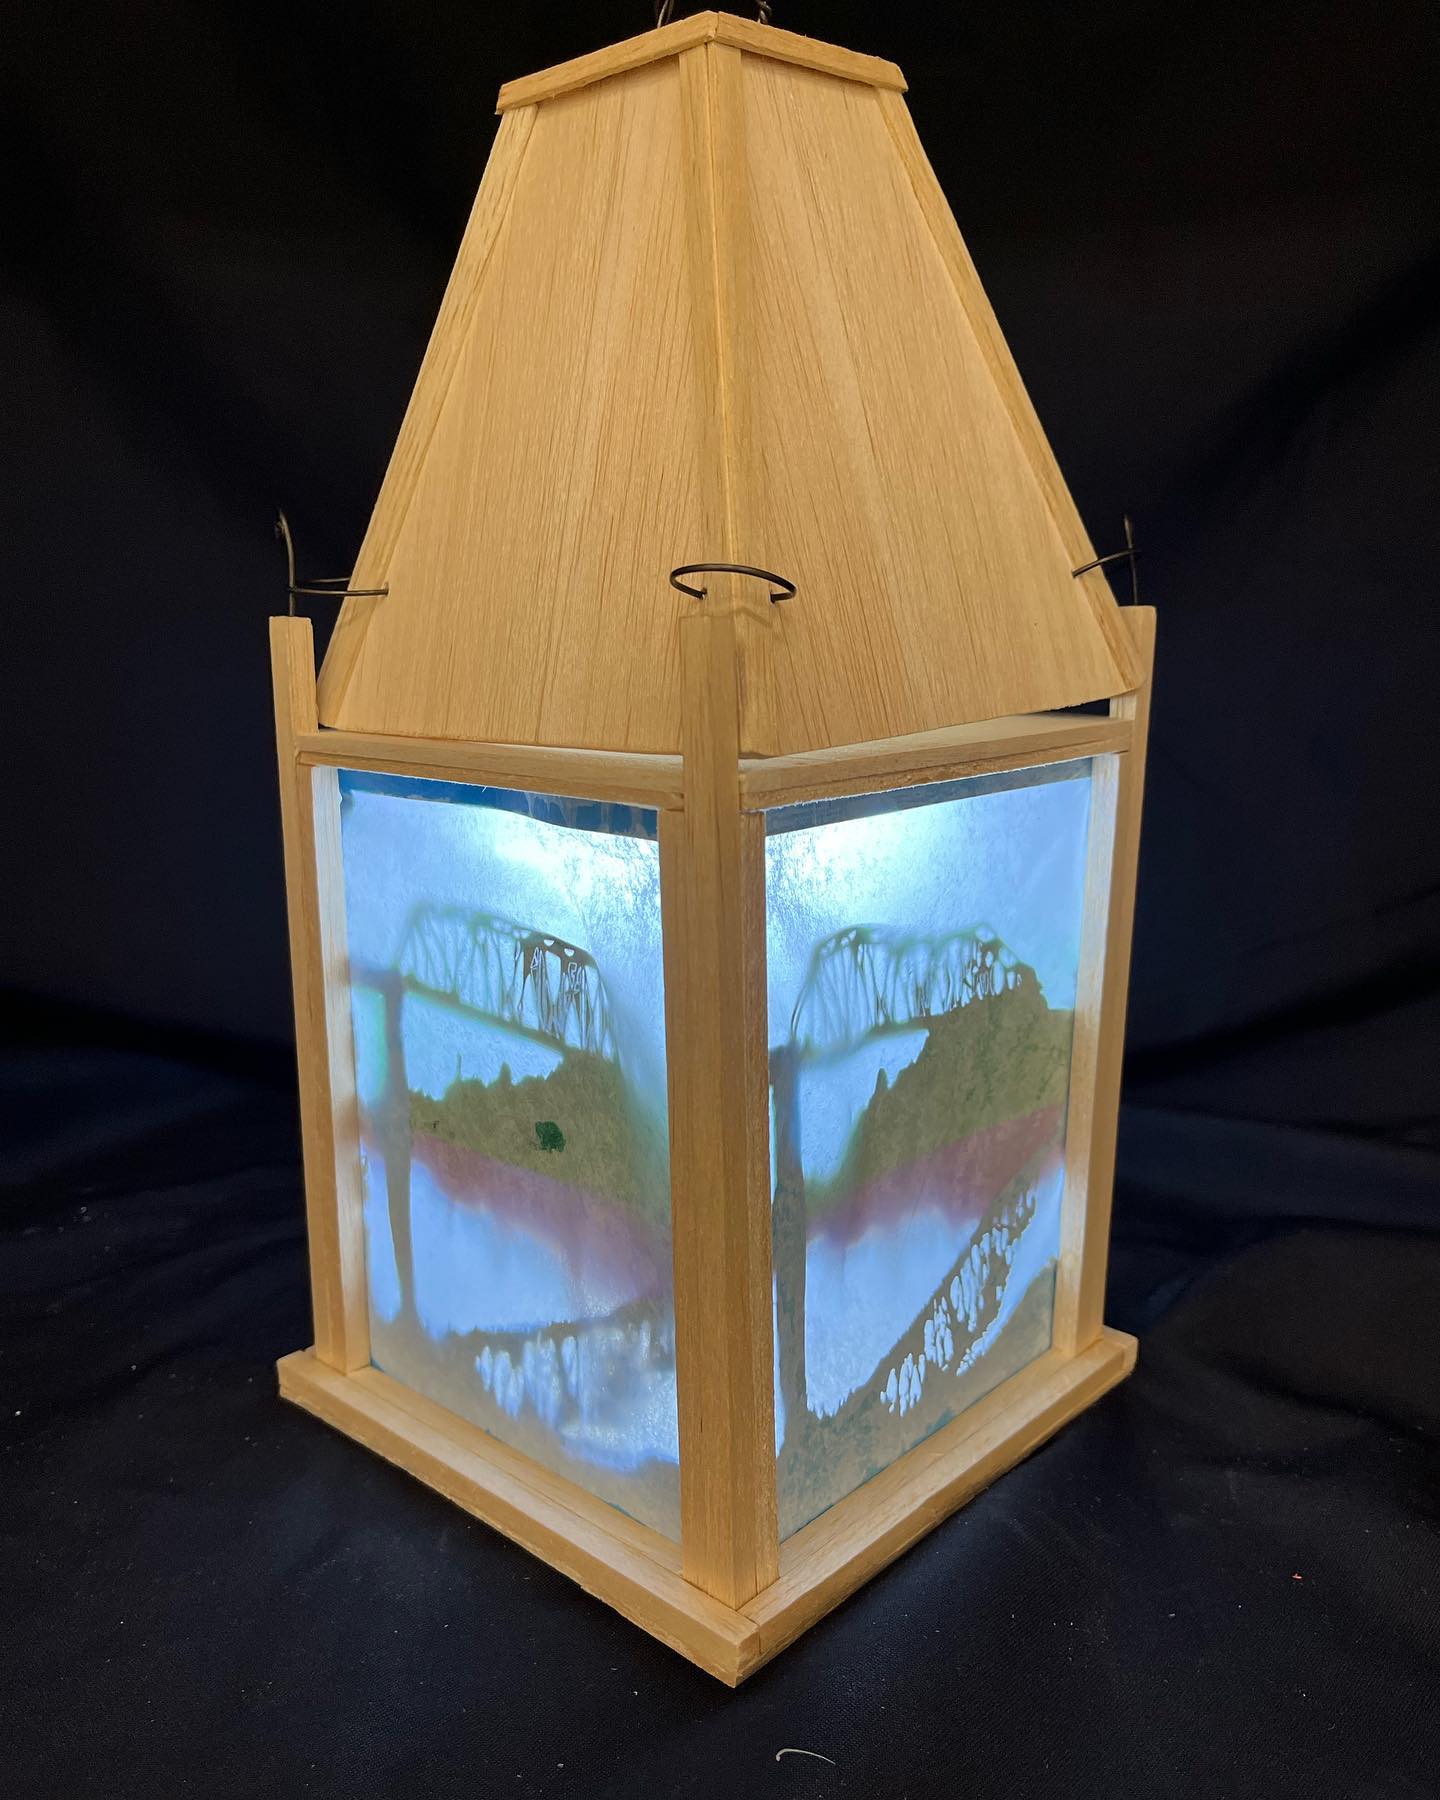 a handmade lantern made of wood and paper